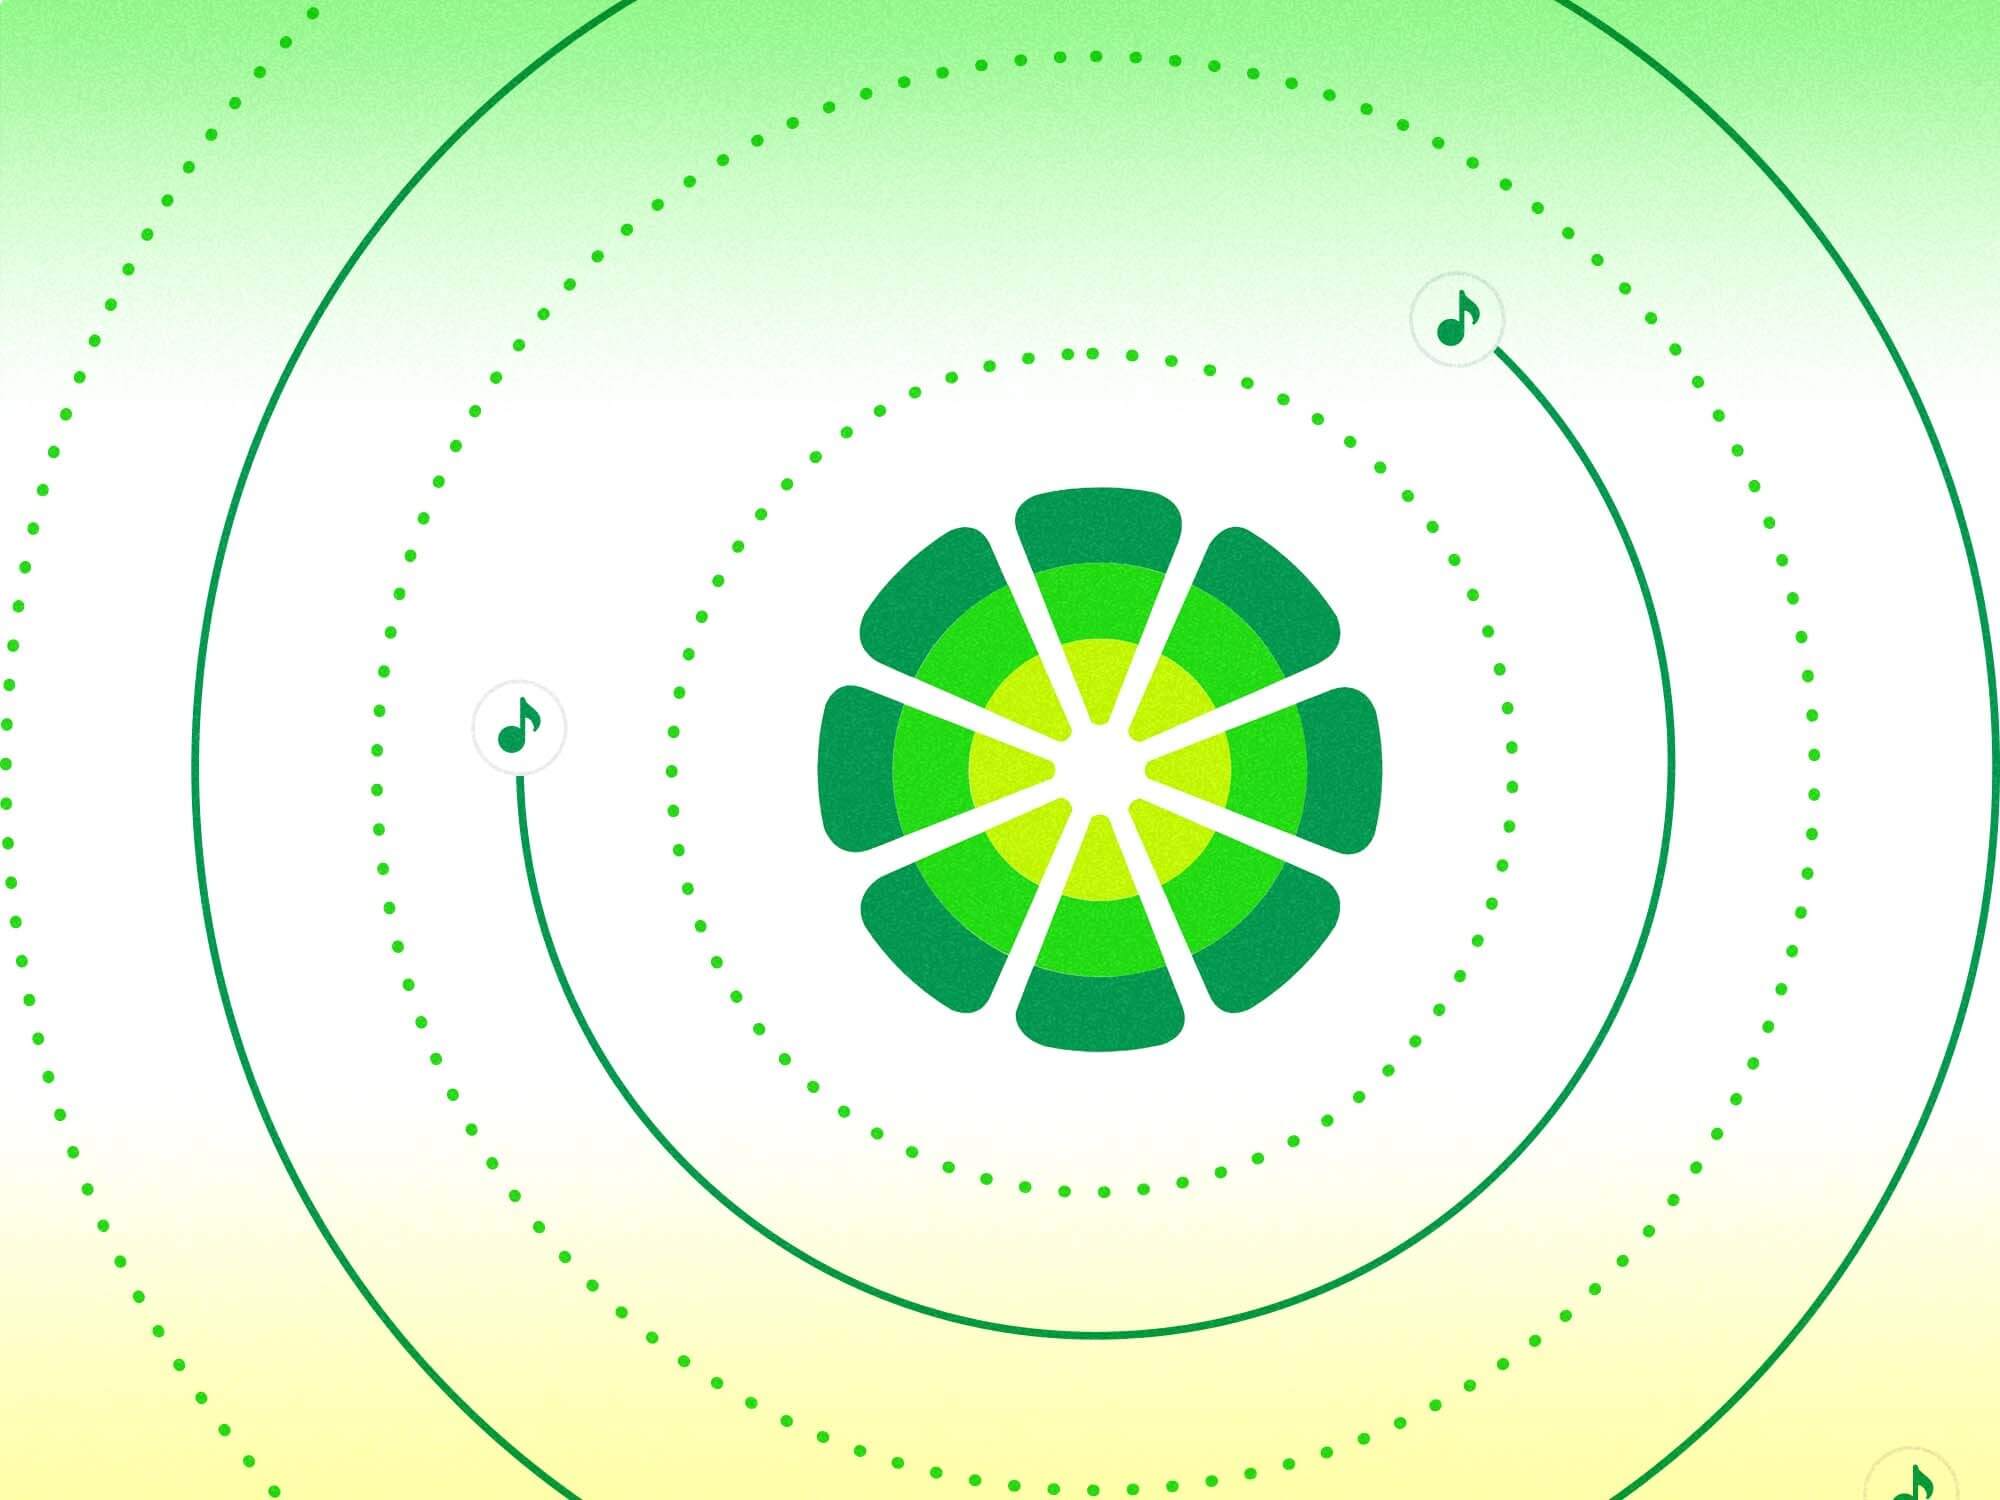 LimeWire 2.0: NFT platform strikes a deal With Universal Music Group